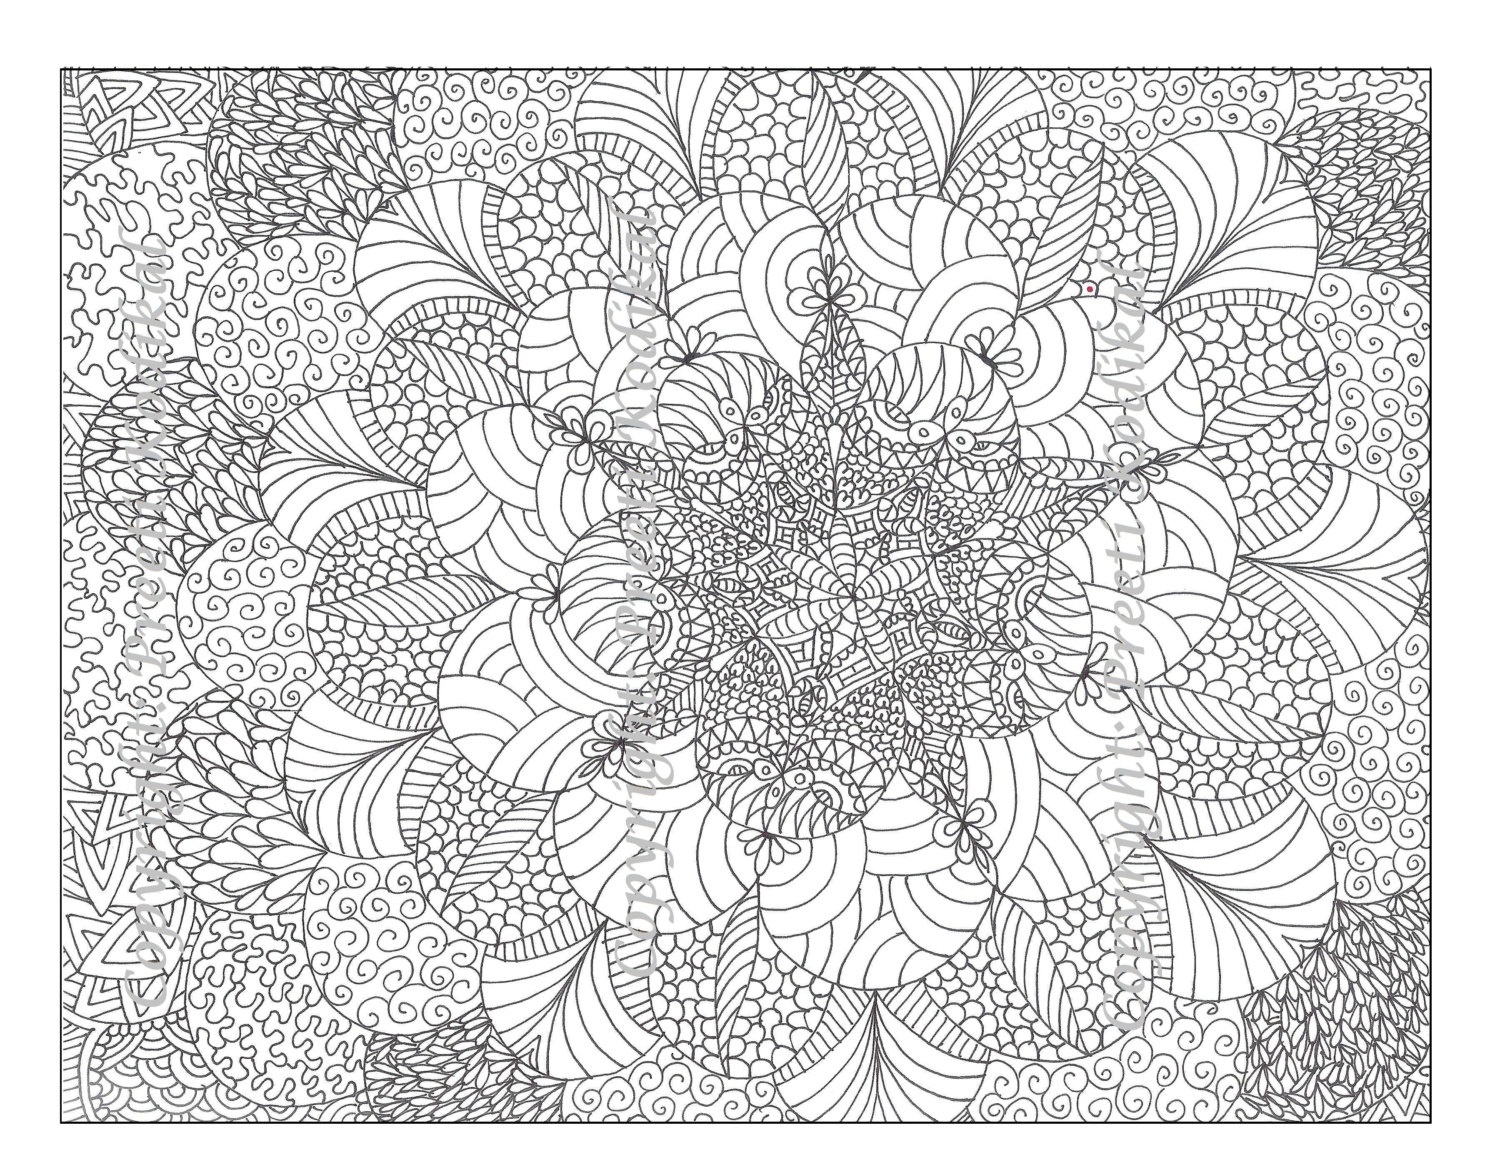 Free Printable Abstract Coloring Pages For Adults - Free Printable Hard Coloring Pages For Adults